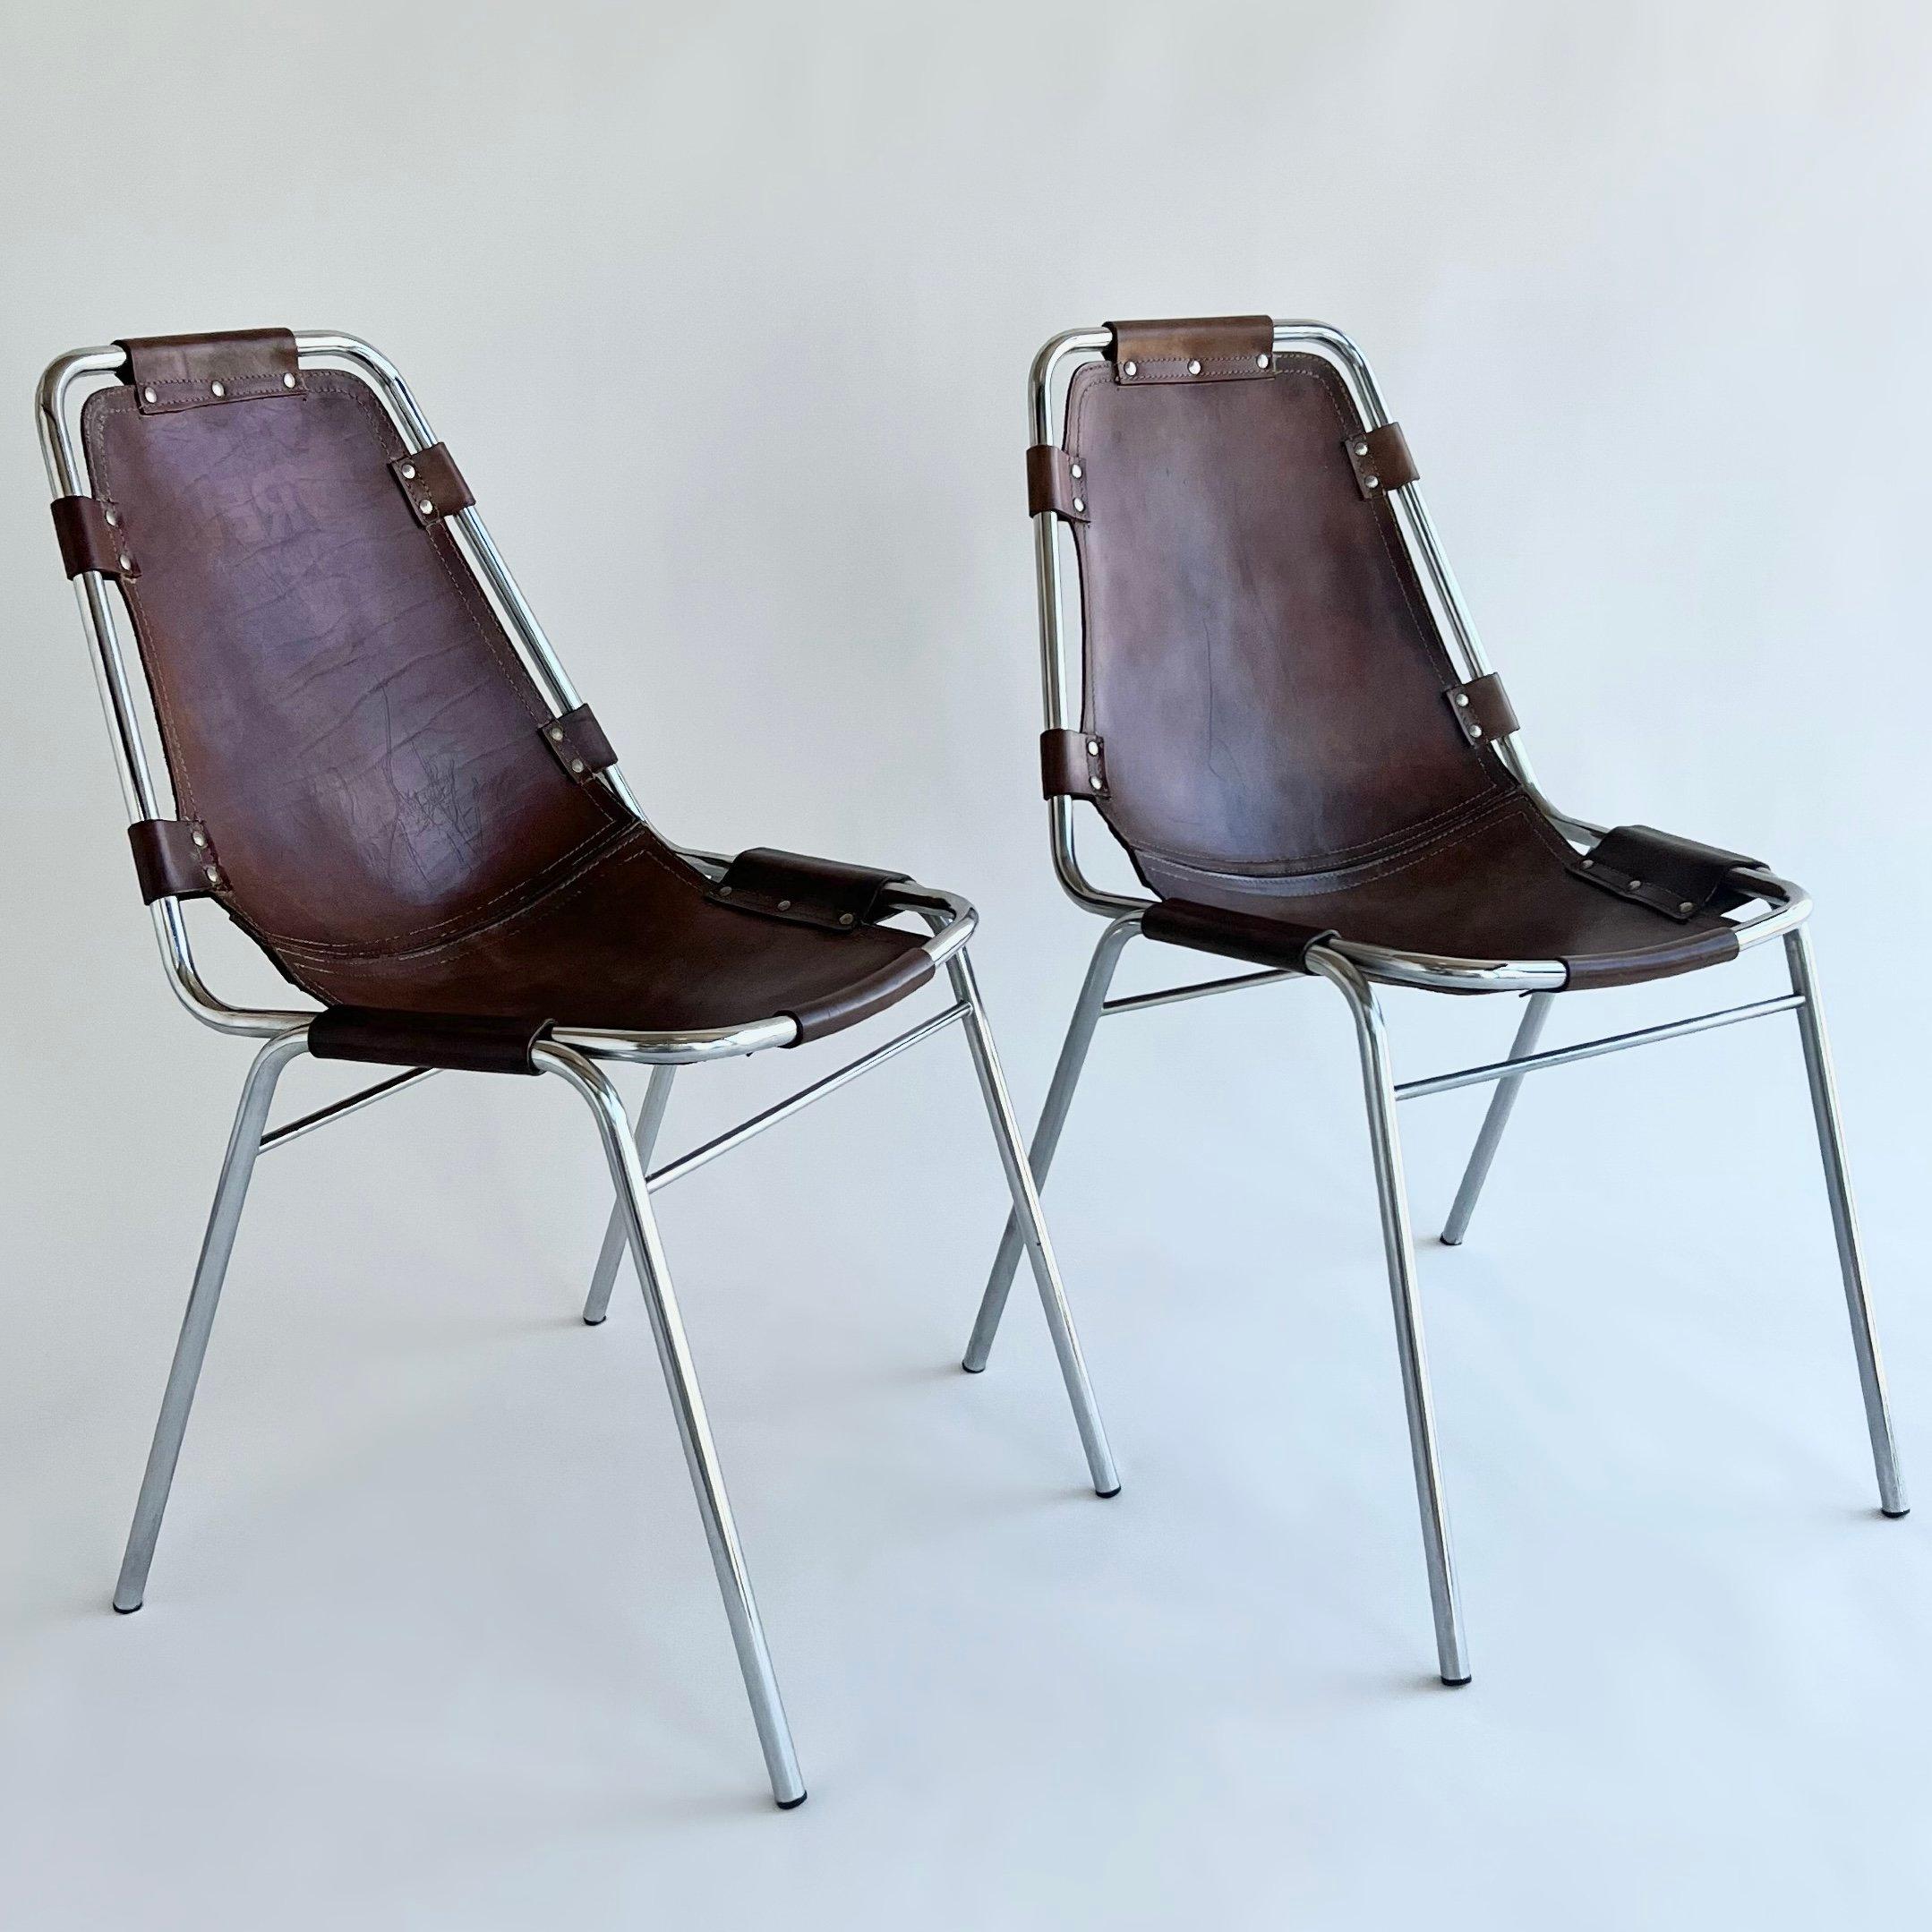 Set of 10 chrome and cognac leather dining chairs selected by Charlotte Perriand for Les Arcs Ski Resort. Manufactured by DalVera, Italy. Circa 1960's